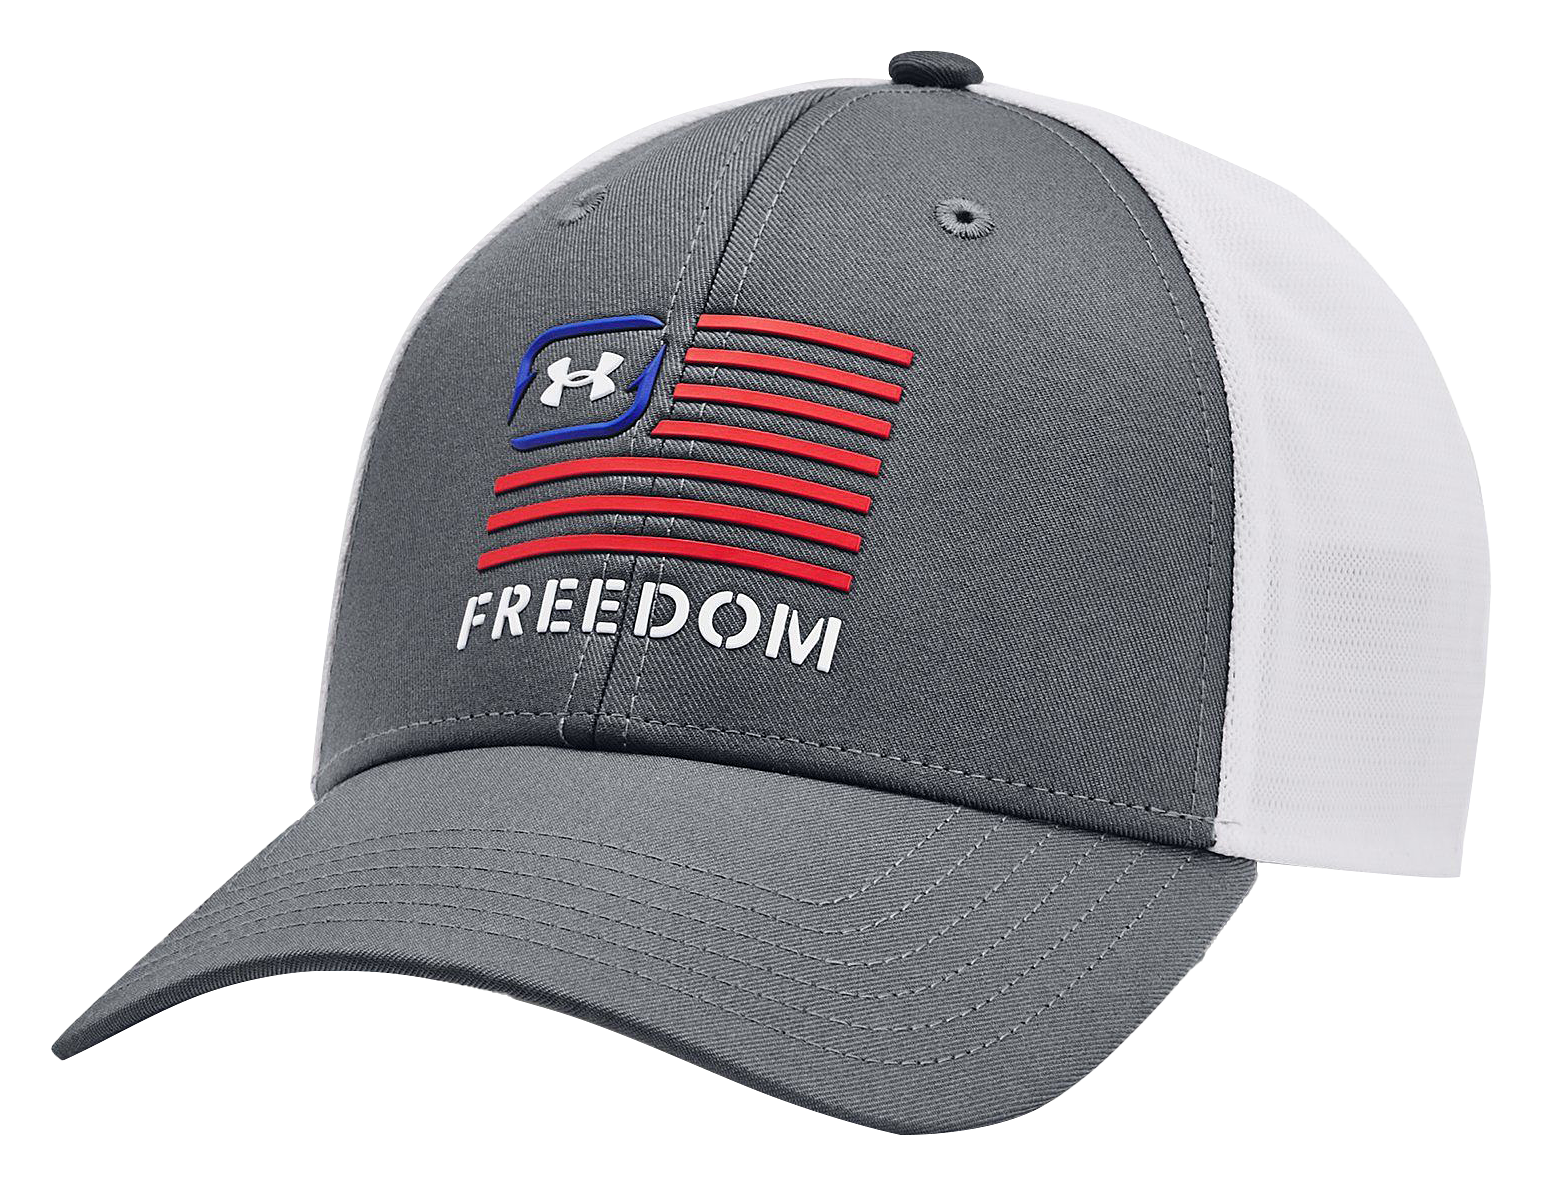 Under Armour Fish Hunter Freedom Mesh Fitted Cap